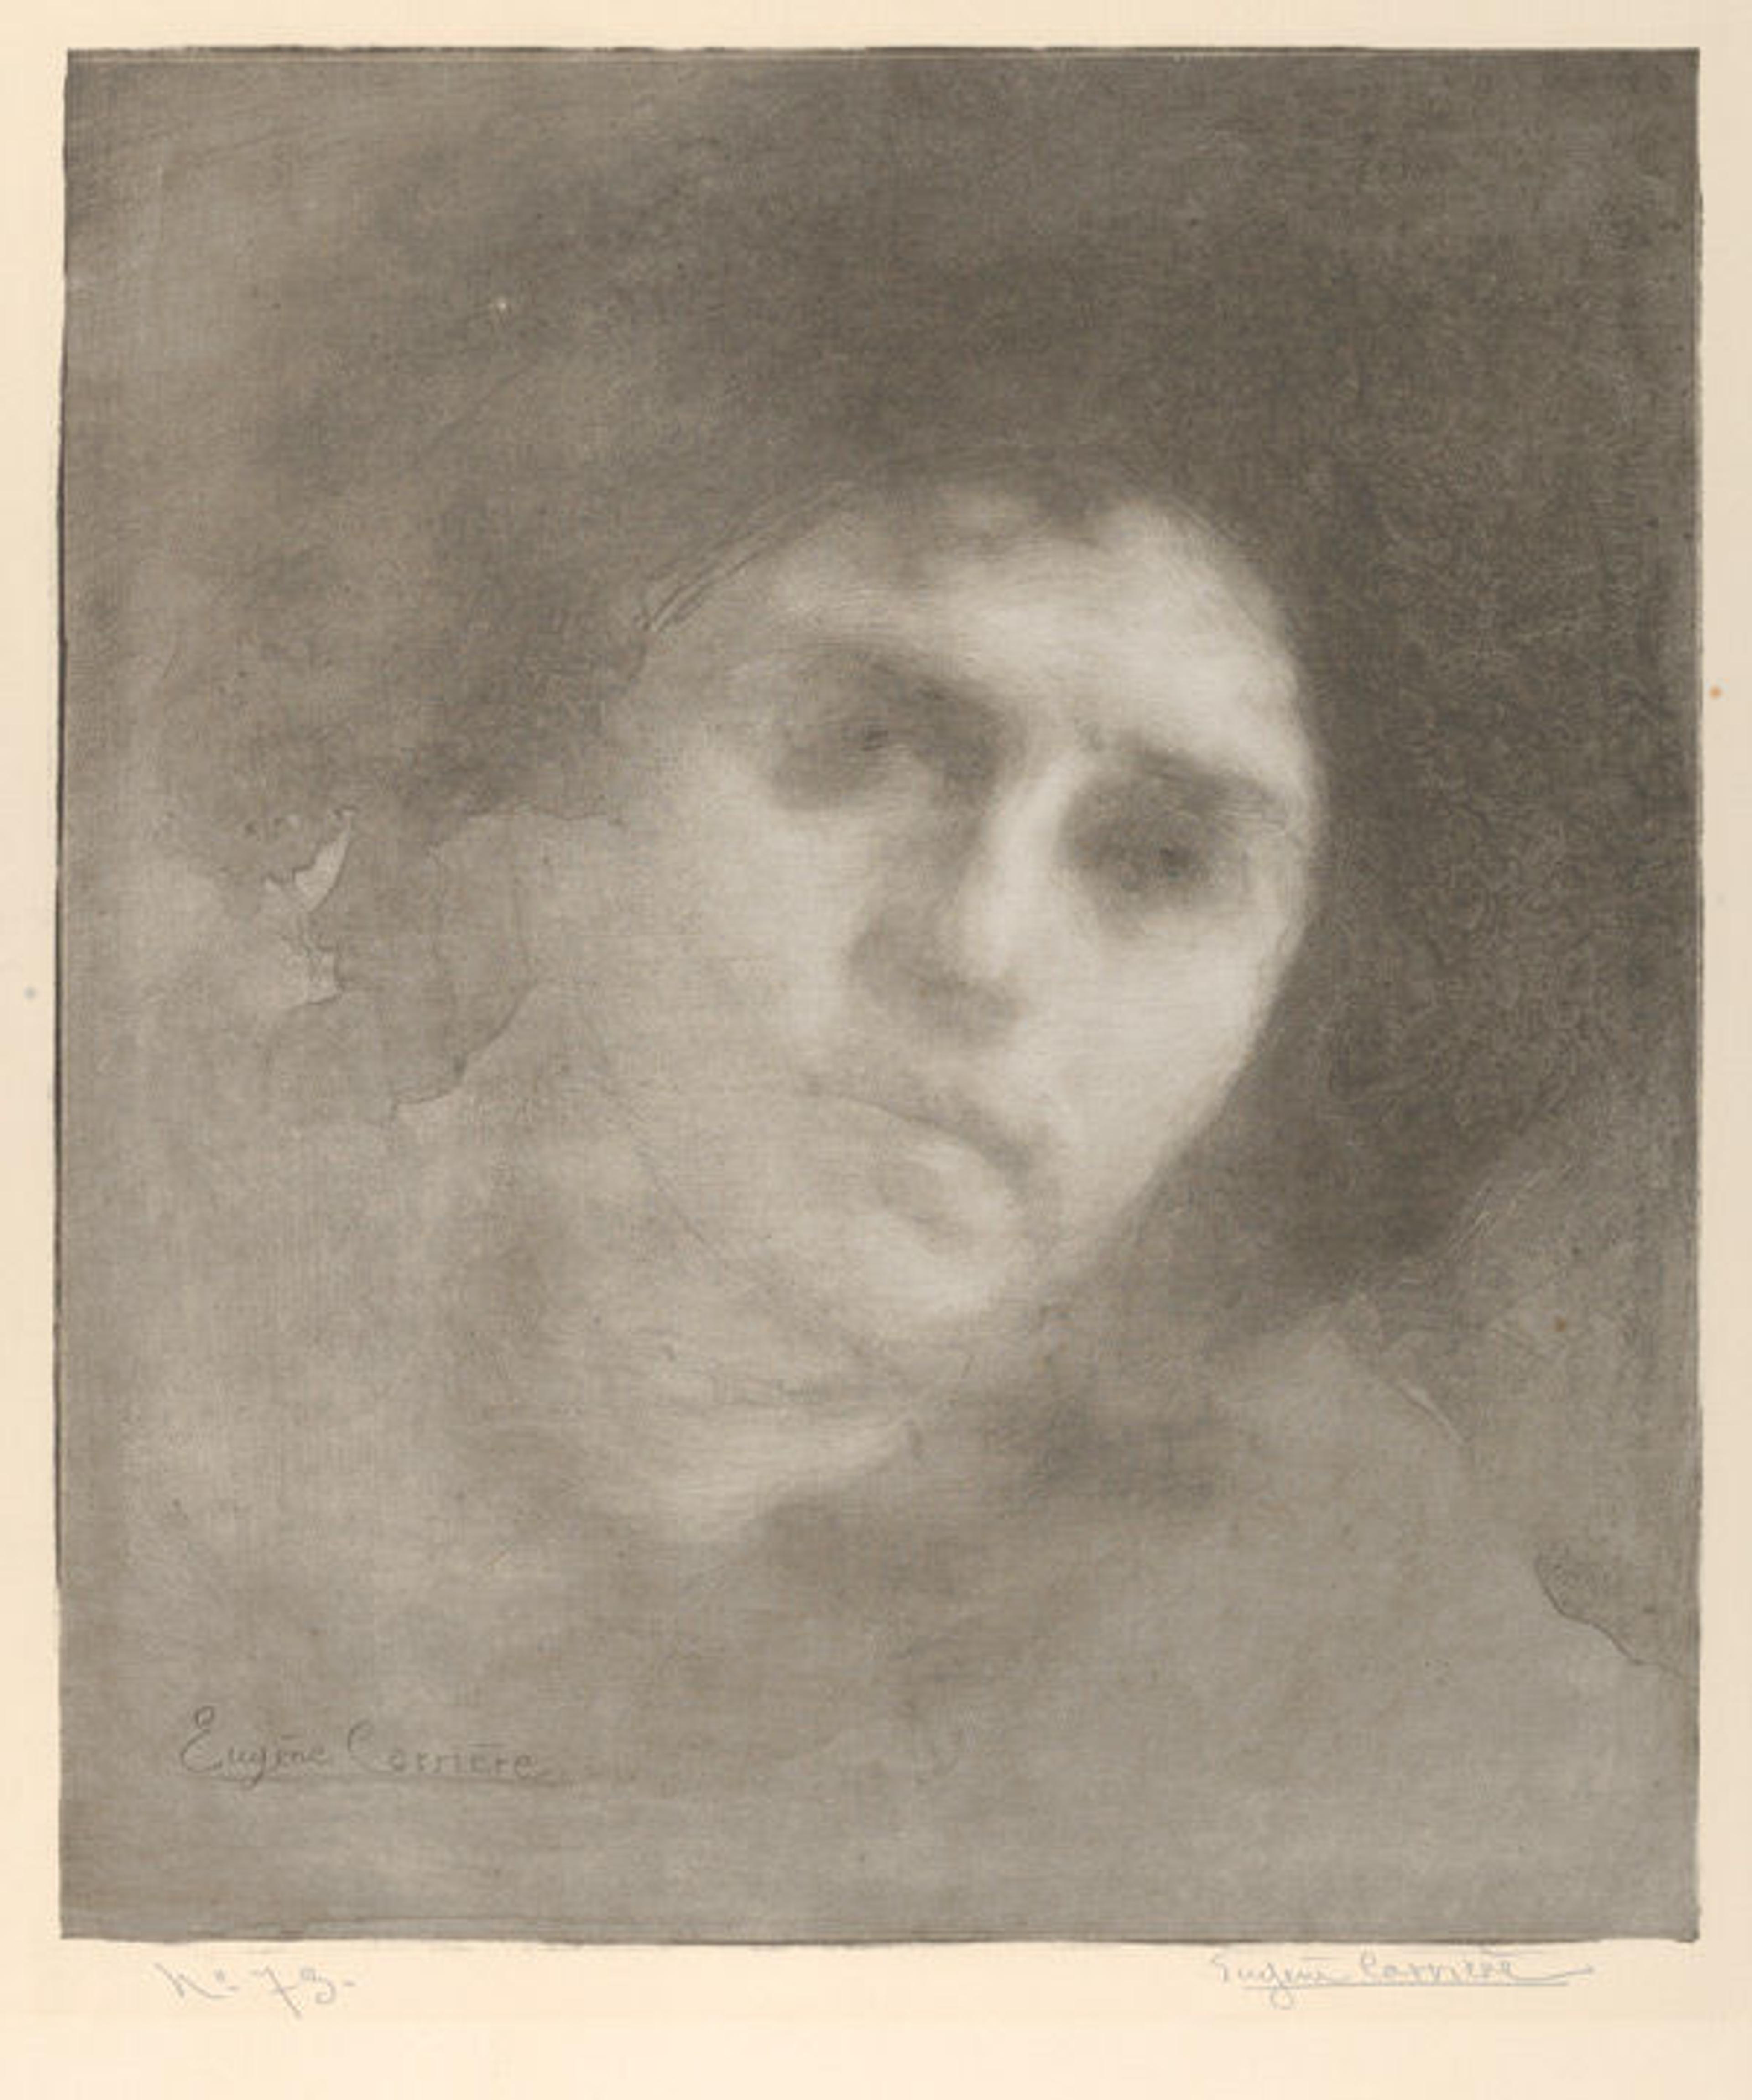 Mme Eugène Carrière (from L'Estampe originale, Album IV), 1893. Eugène Carrière (French, 1849–1906) Publisher André Marty (French, 1857). Lithograph; only state; Image: 10 5/8 × 13 3/4 in. (27 × 35 cm). Sheet: 13 1/4 × 17 11/16 in. (33.7 × 45 cm). The Metropolitan Museum of Art, New York, Rogers Fund, 1922 (22.82.1-32)